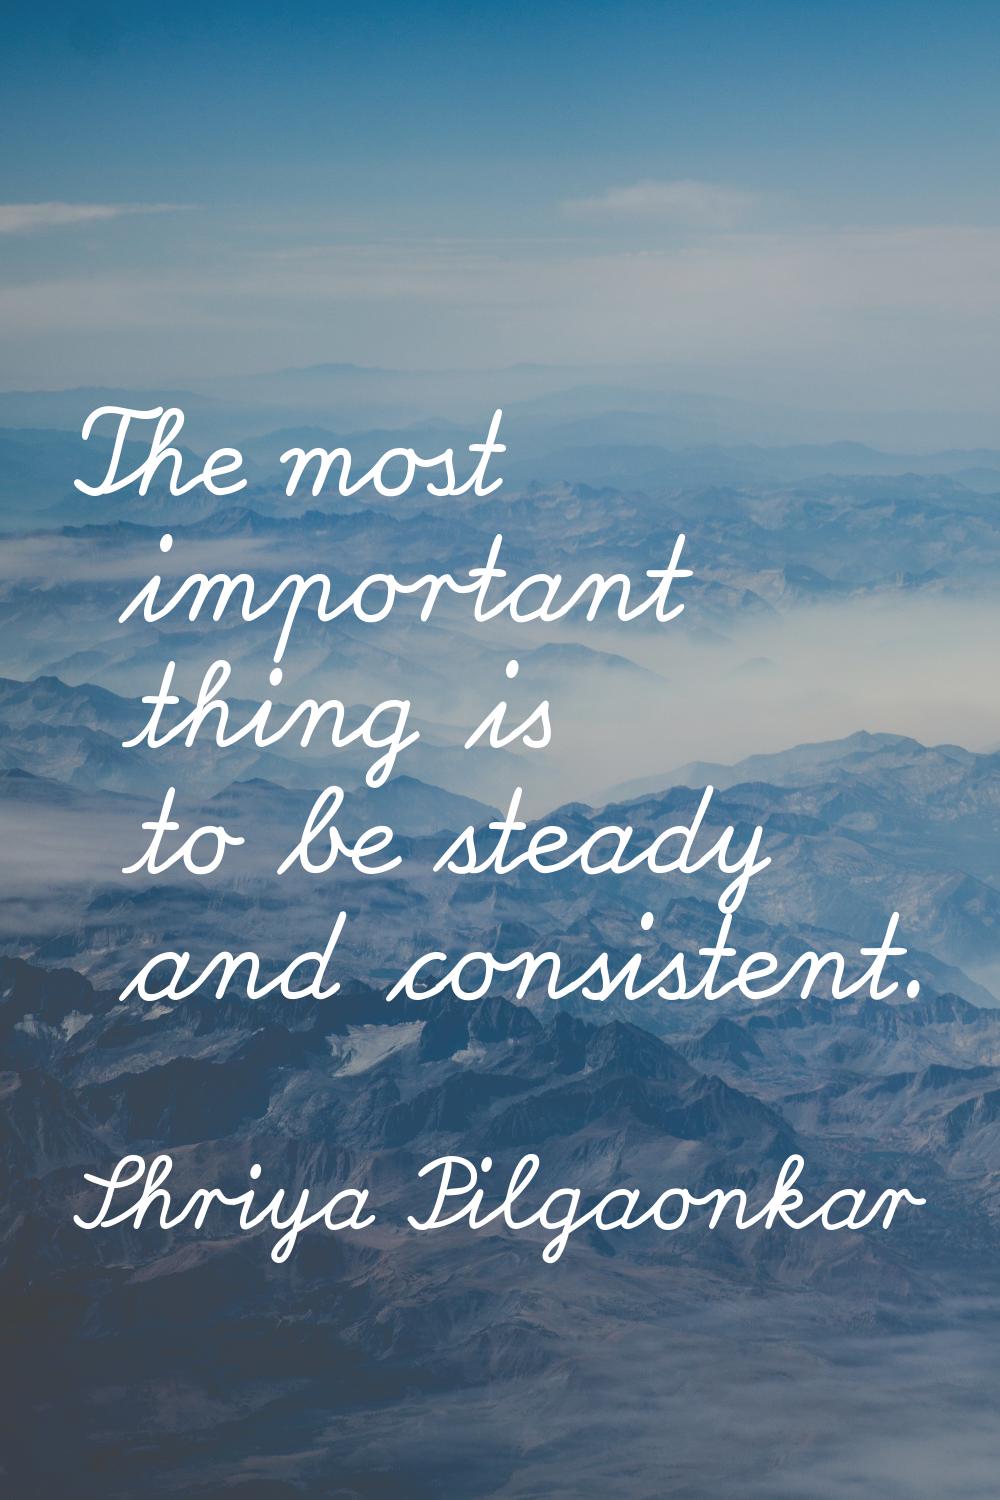 The most important thing is to be steady and consistent.